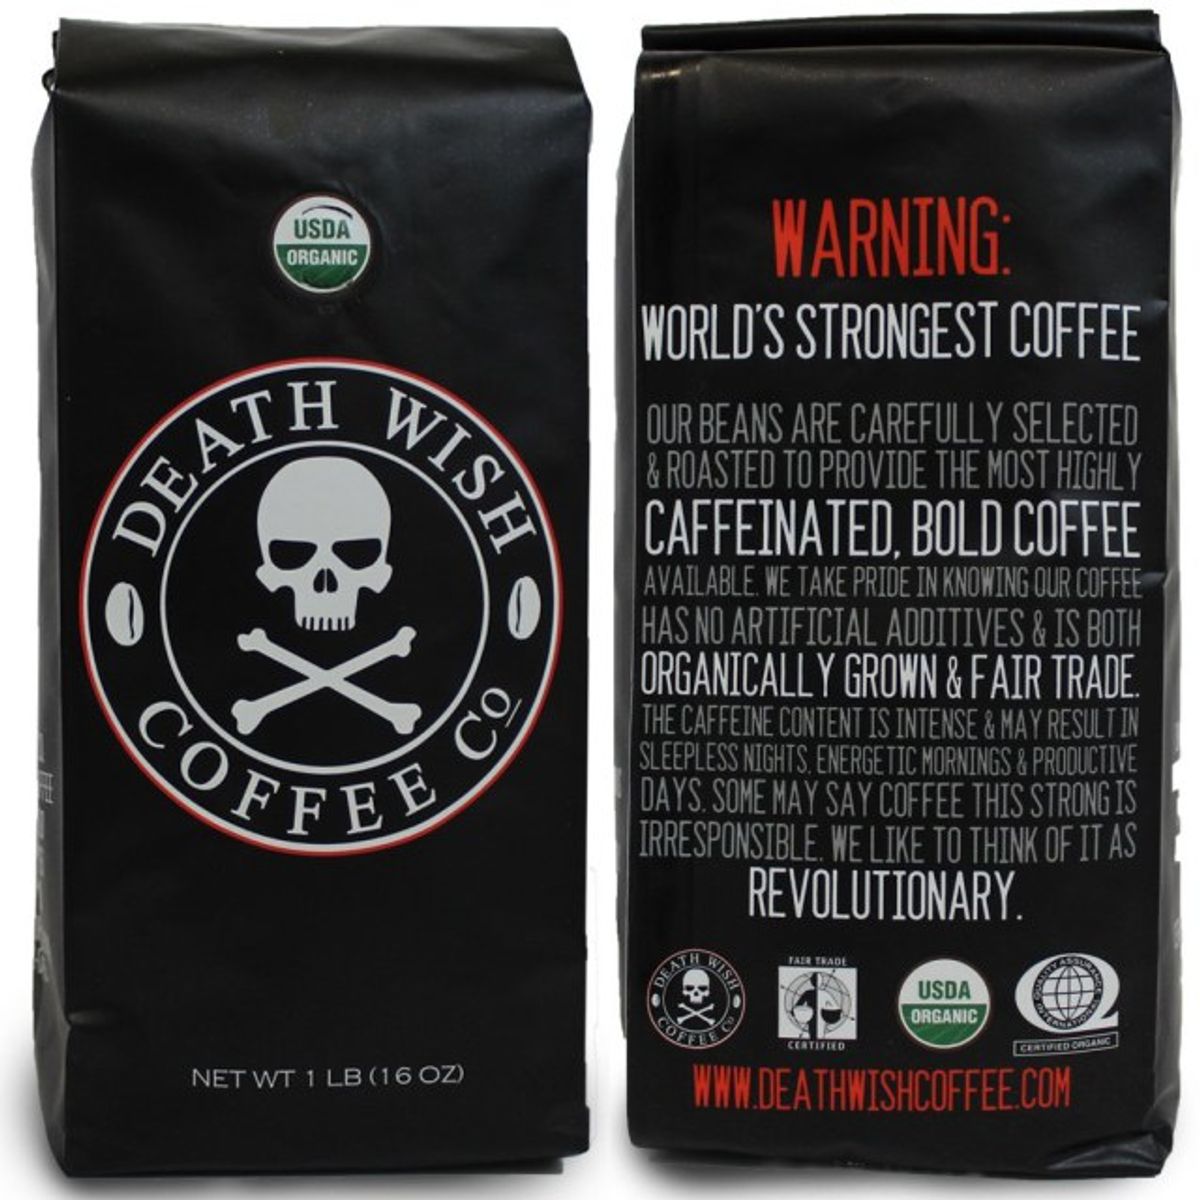 Is it really the World's Strongest Coffee?